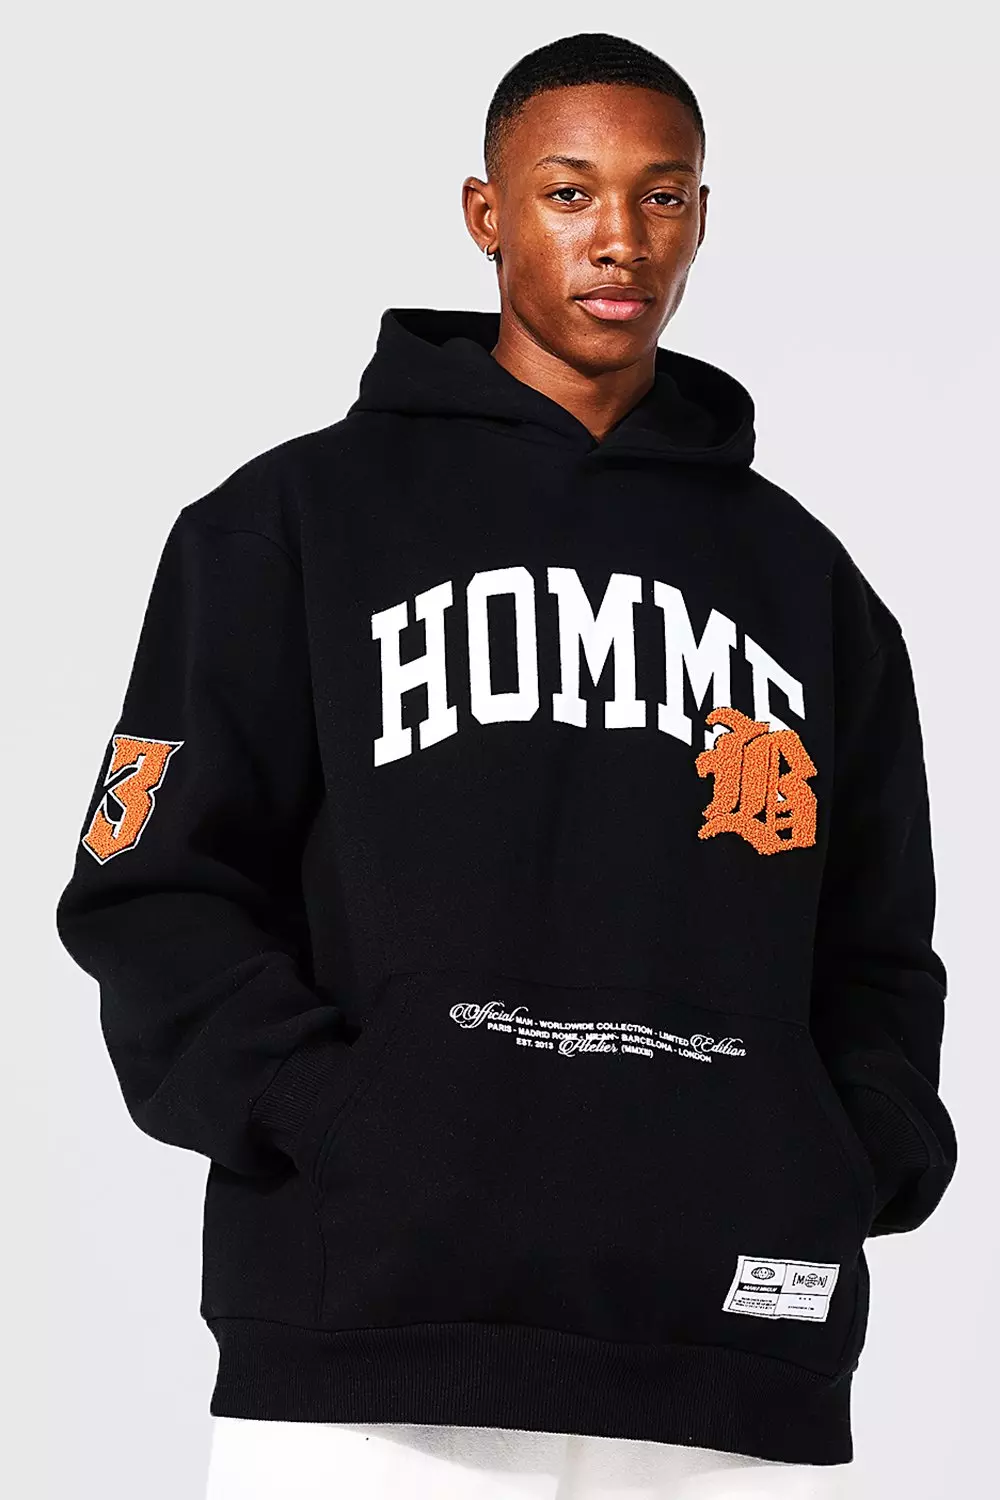 Collection Homme